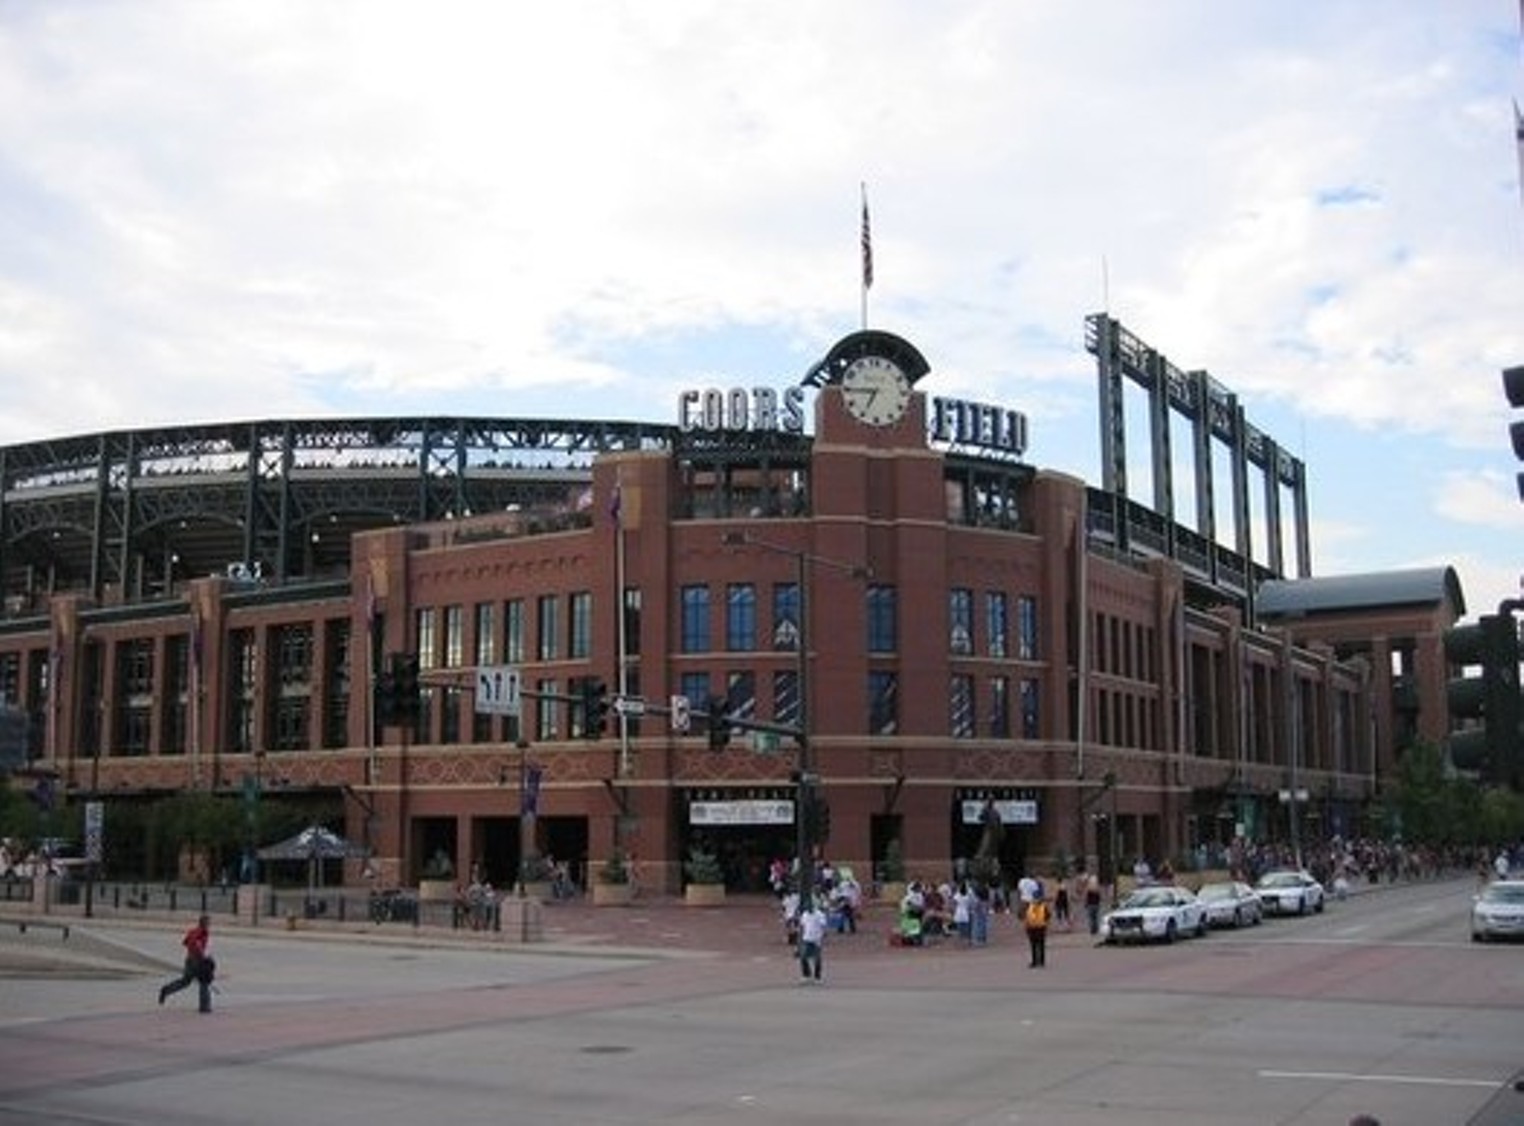 Colorado Rockies - The Diamond Dry Goods store at Coors Field is